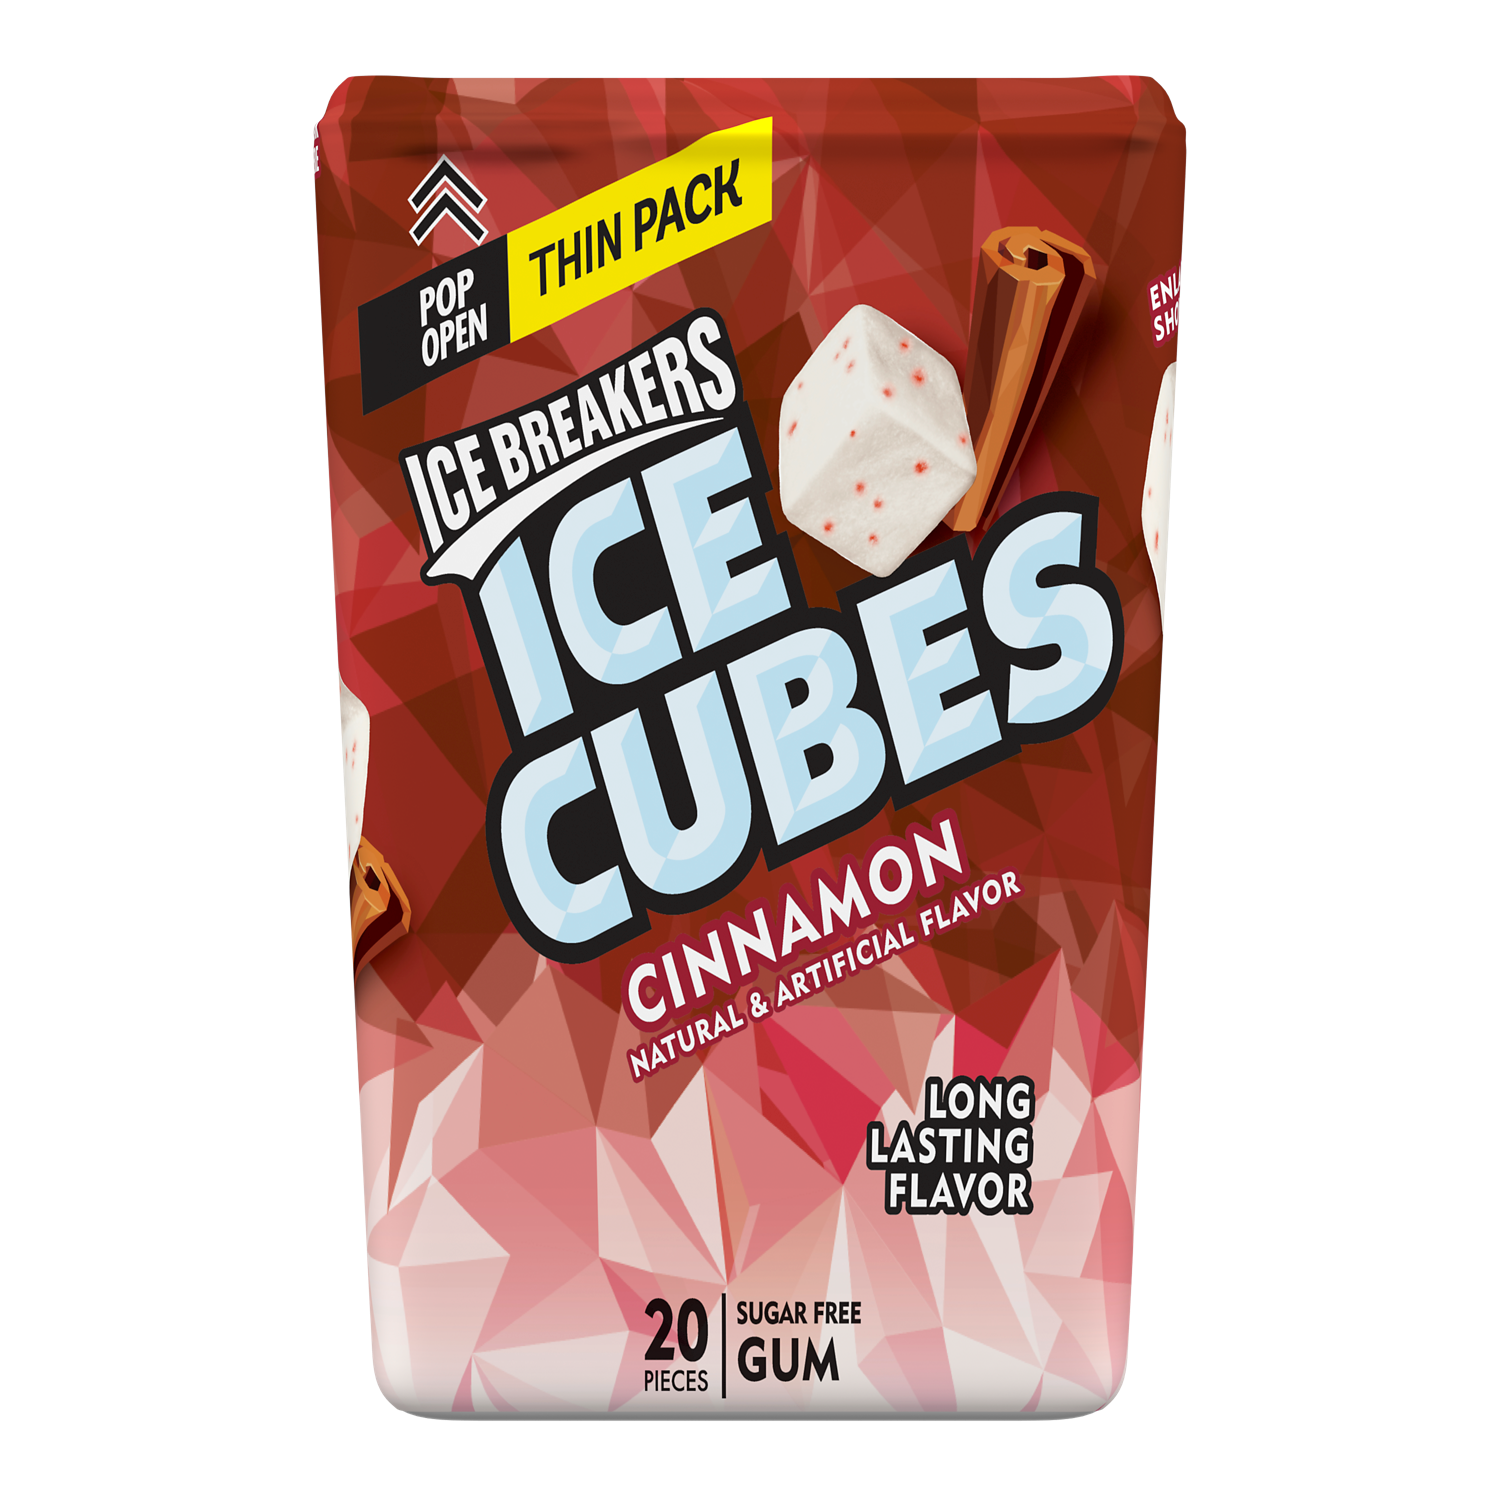 ICE BREAKERS ICE CUBES Cinnamon Sugar Free Gum, 1.62 oz thin pack, 20 pieces - Front of Package